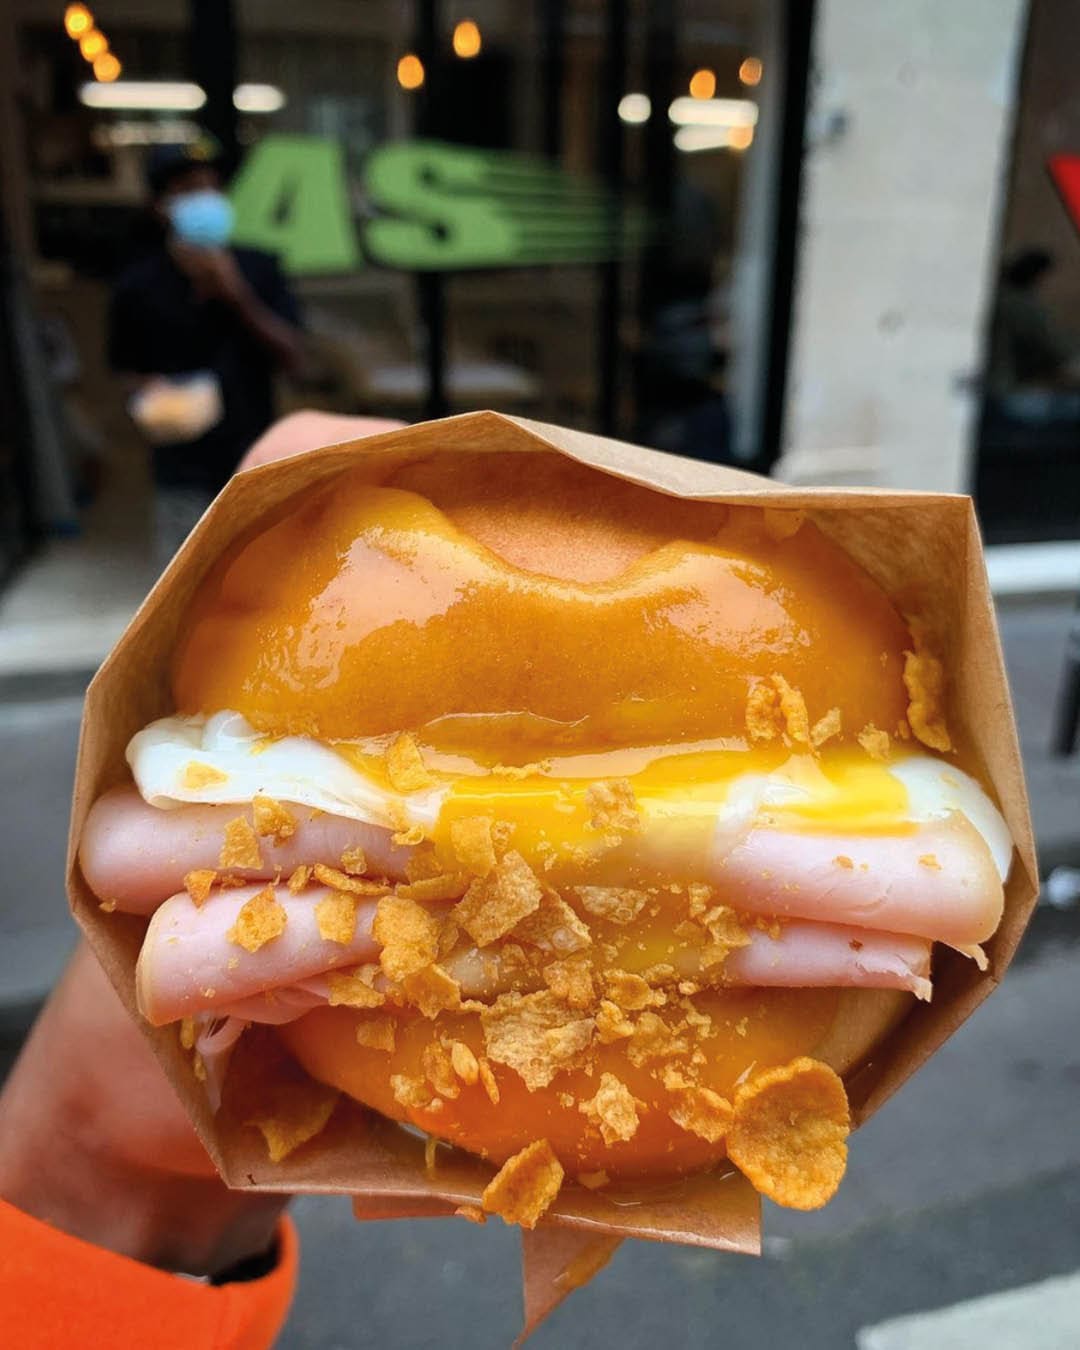 A ham, egg and cheese cereal bunheld in a brown paper bag outside Paperboy coffee shop in Paris.